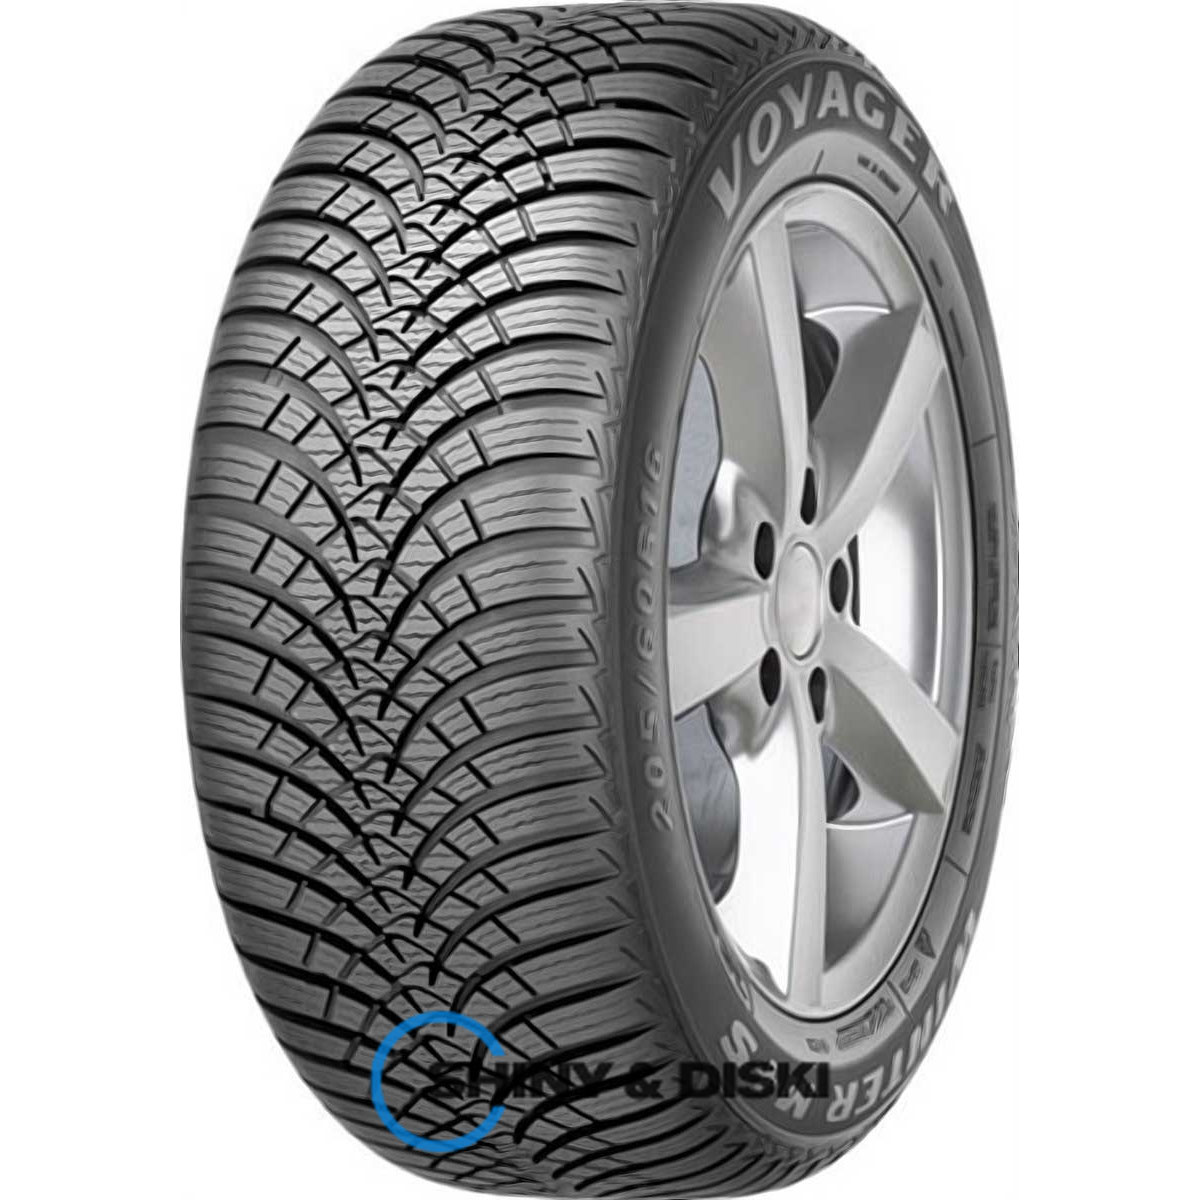 voyager winter 215/55 r16 97h xl